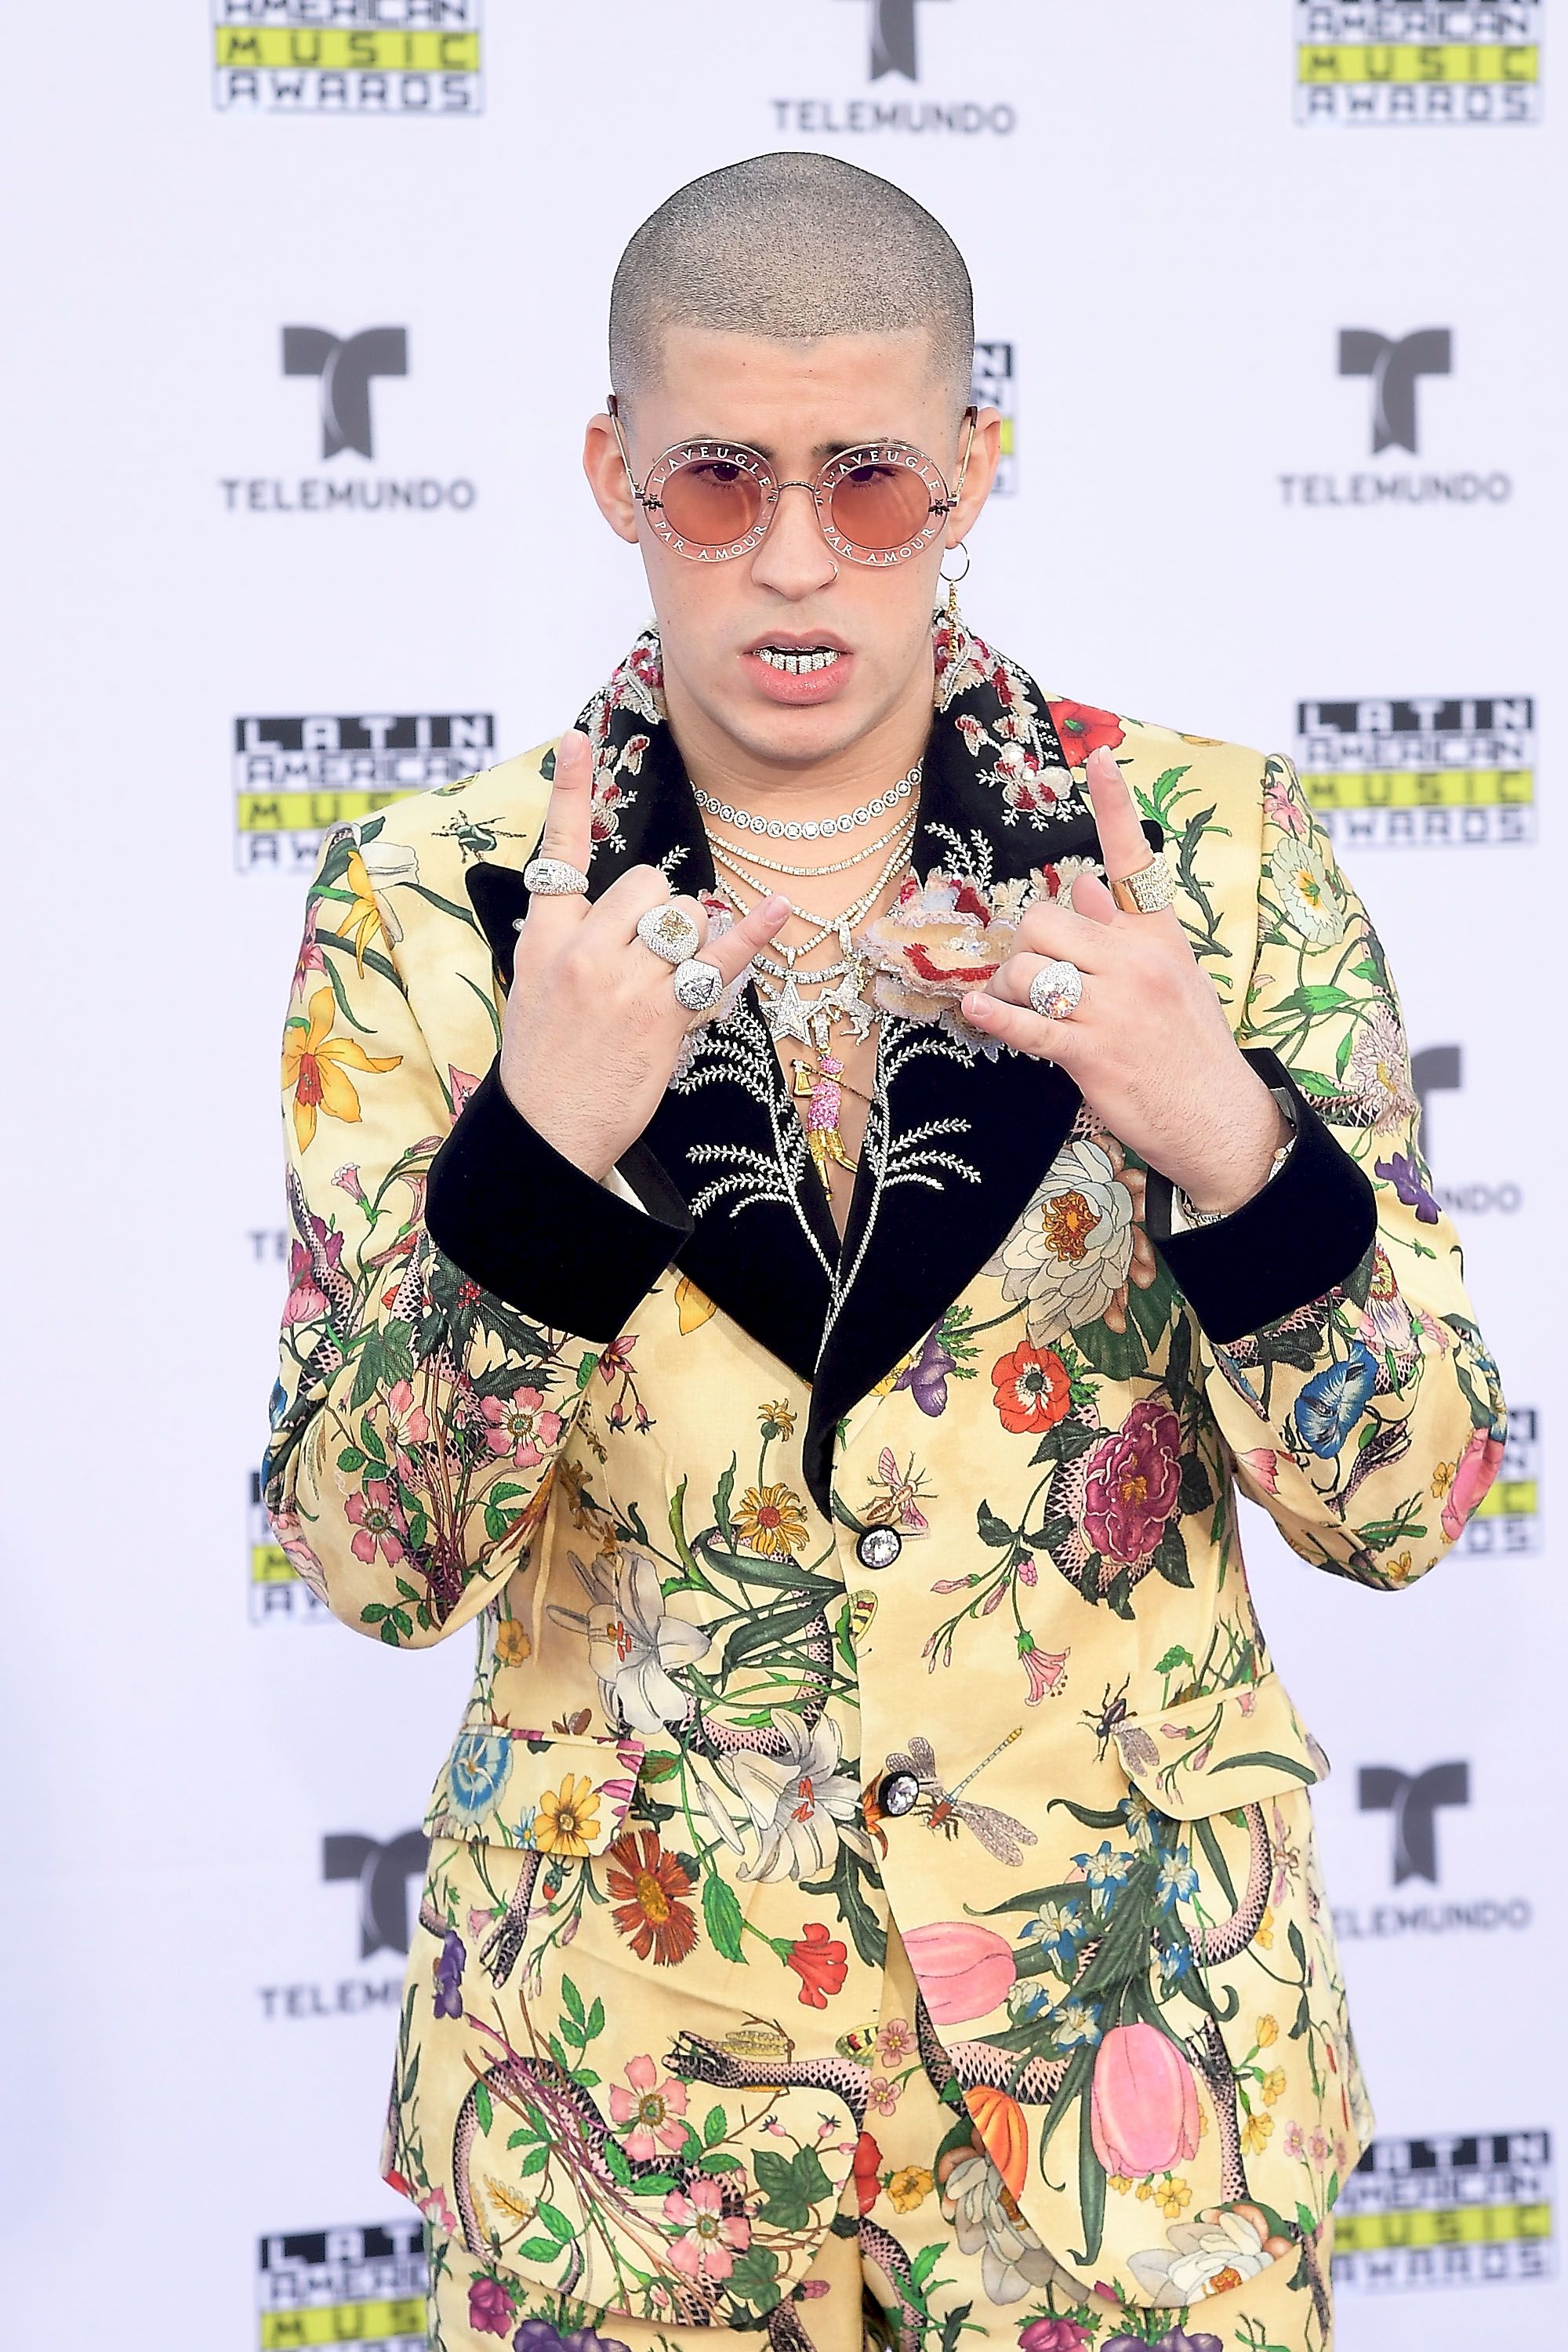 Storm Pablo: The stylist who turned Bad Bunny into a fashion icon, Culture